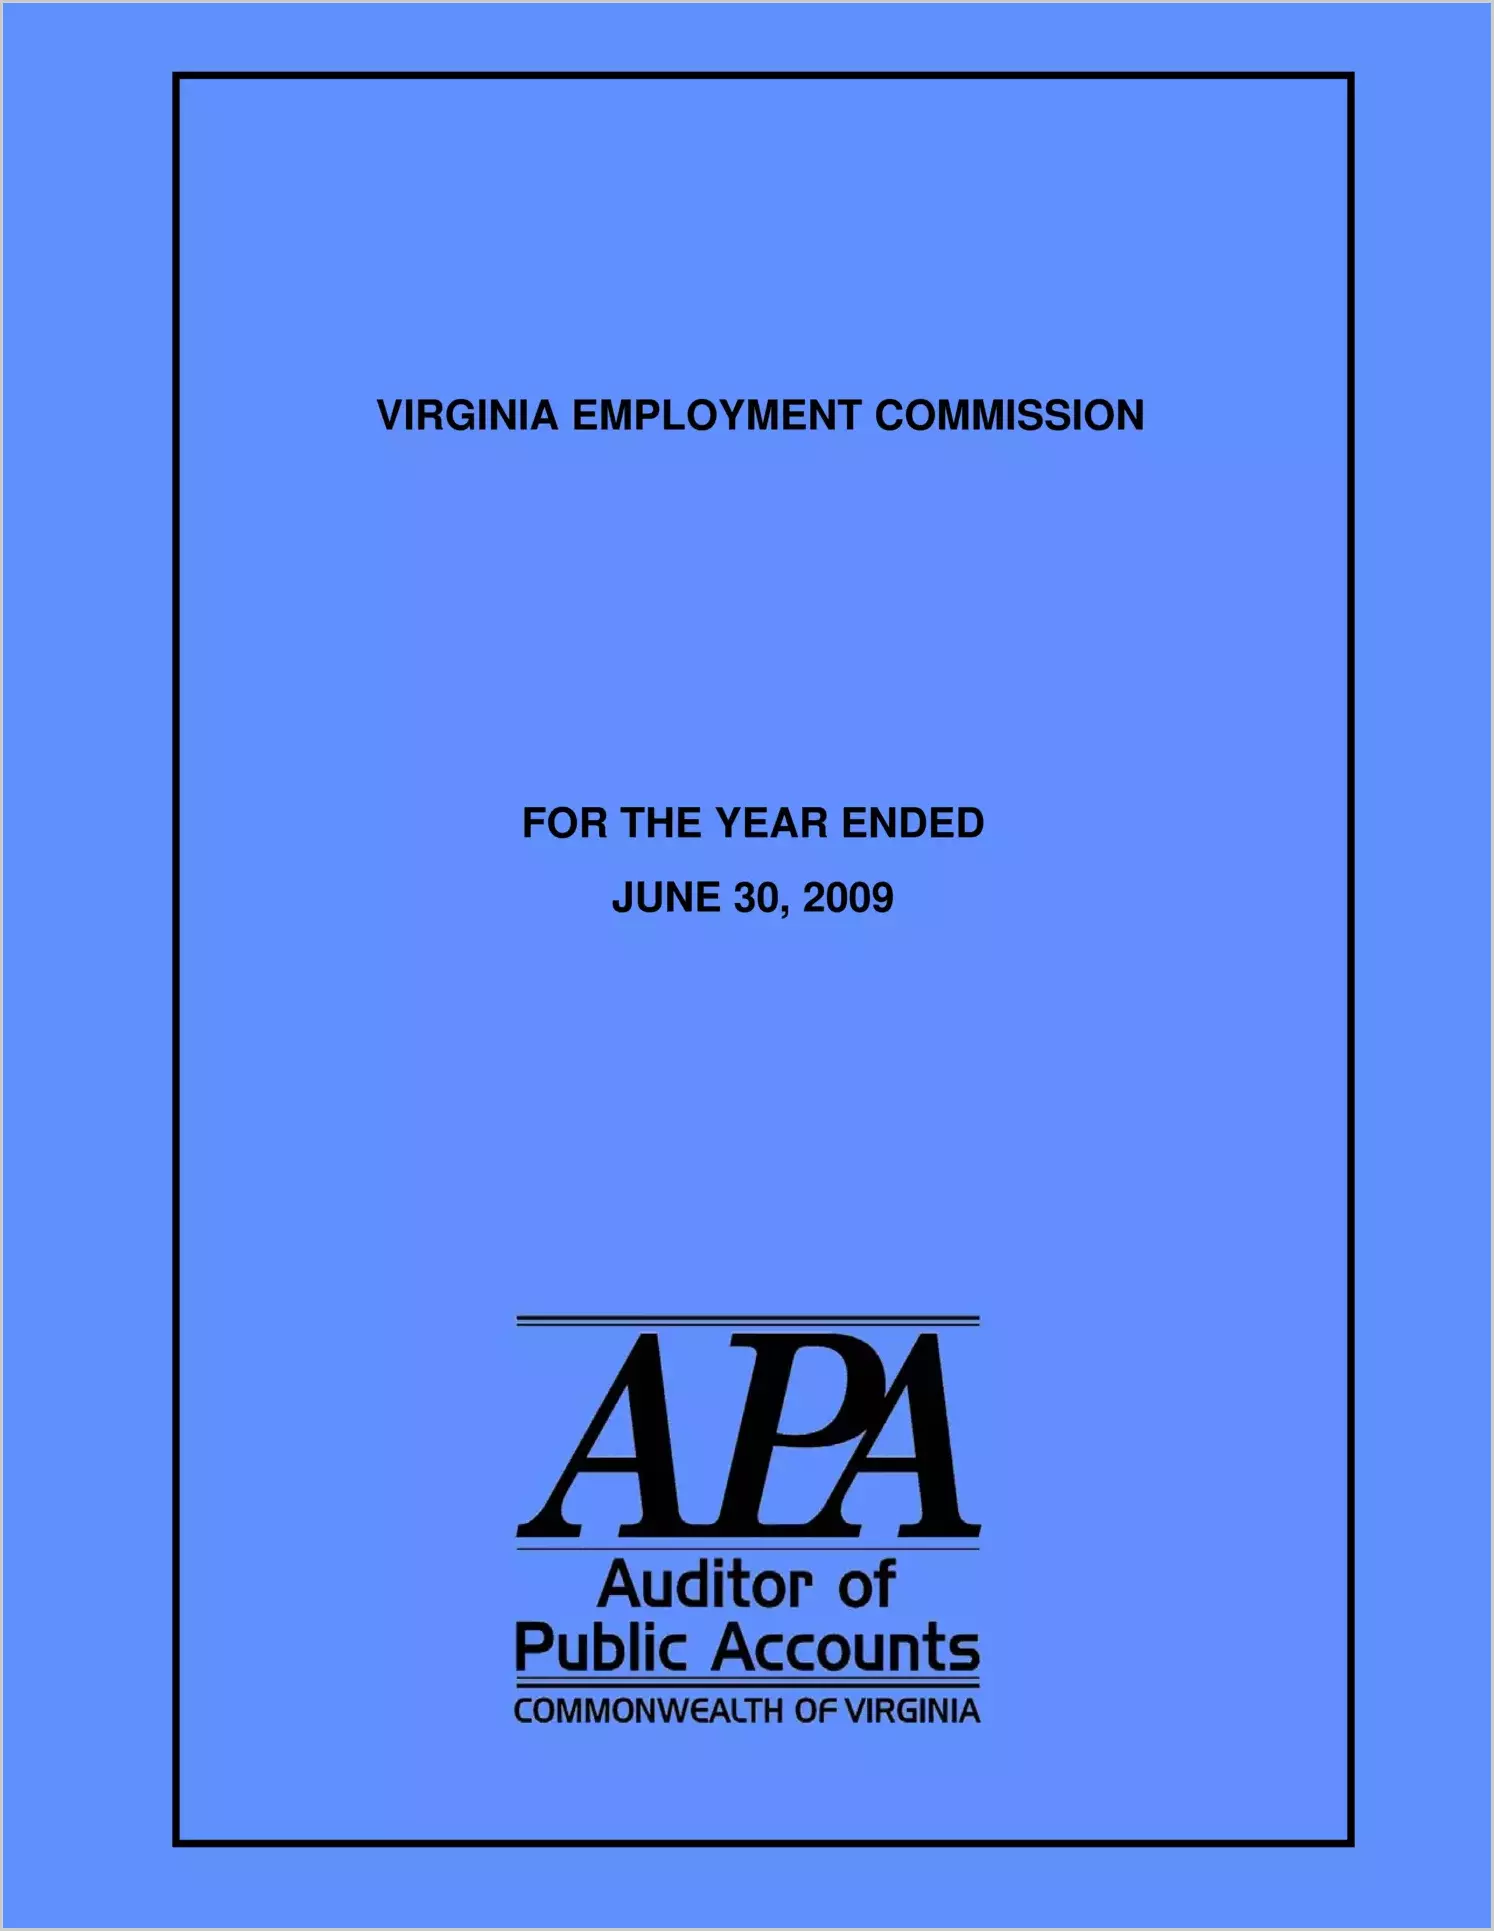 Virginia Employment Commission for the year ended June 30, 2009